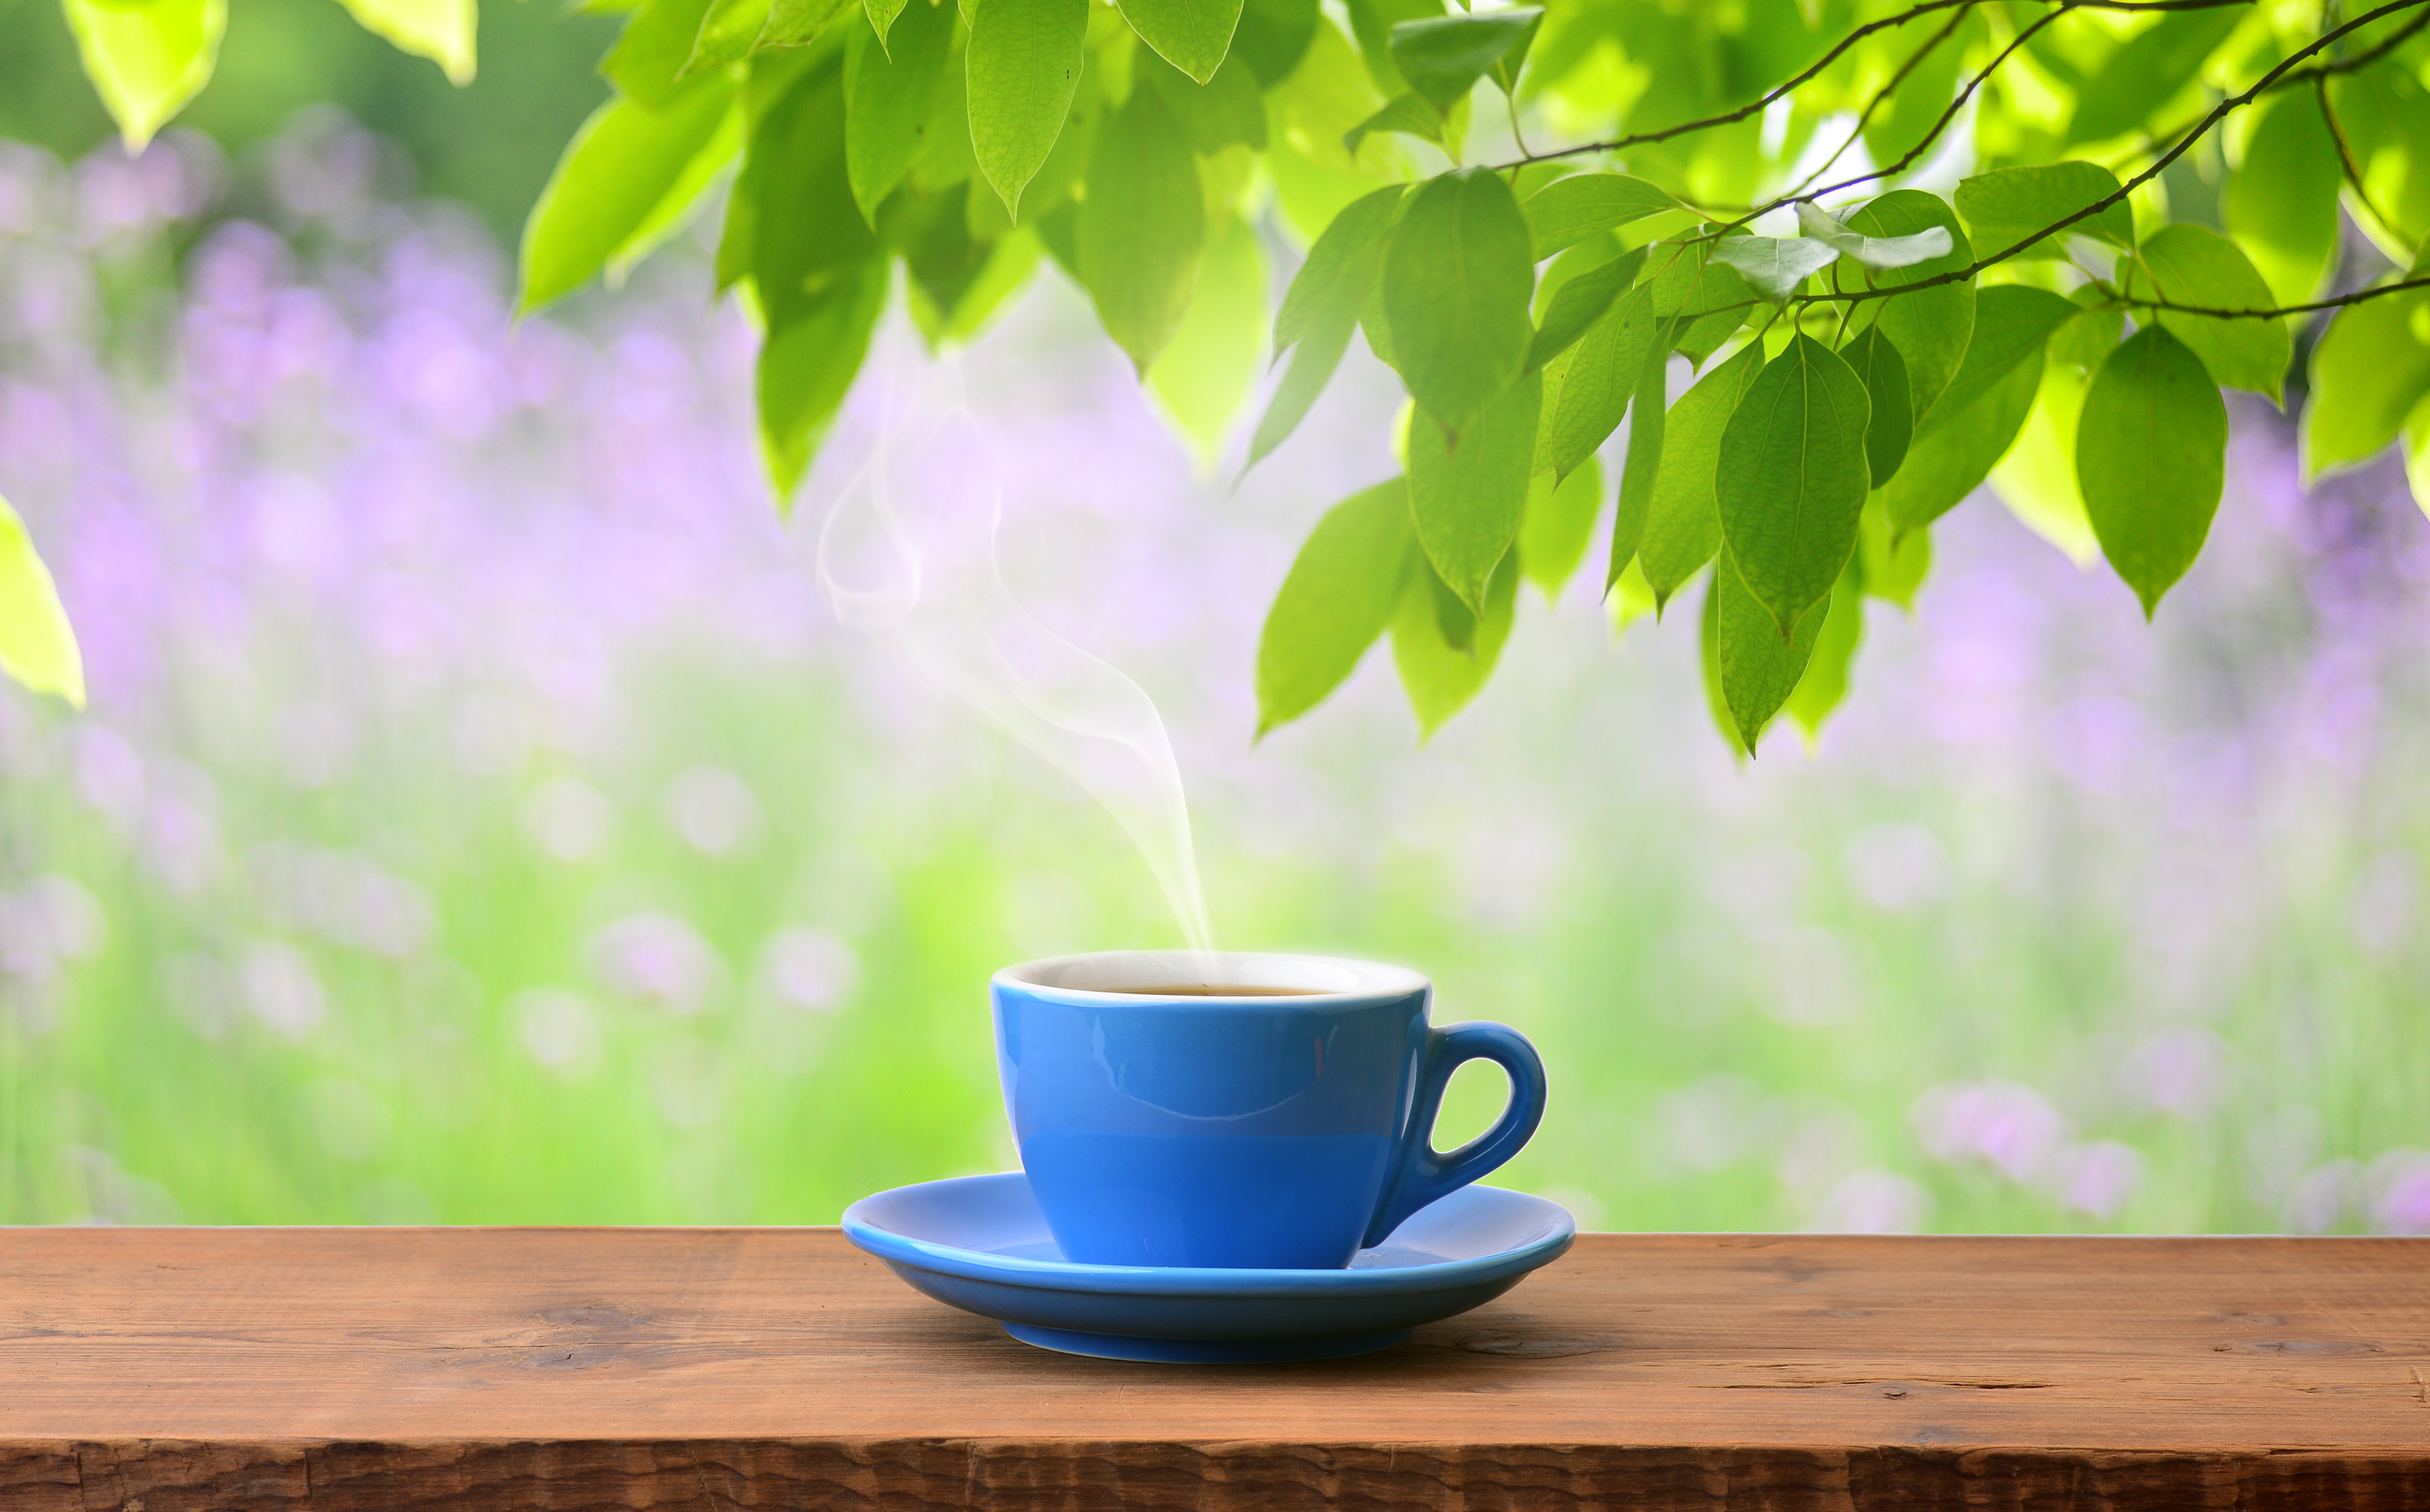 A steamy hot tea or coffee is full of health benefits.